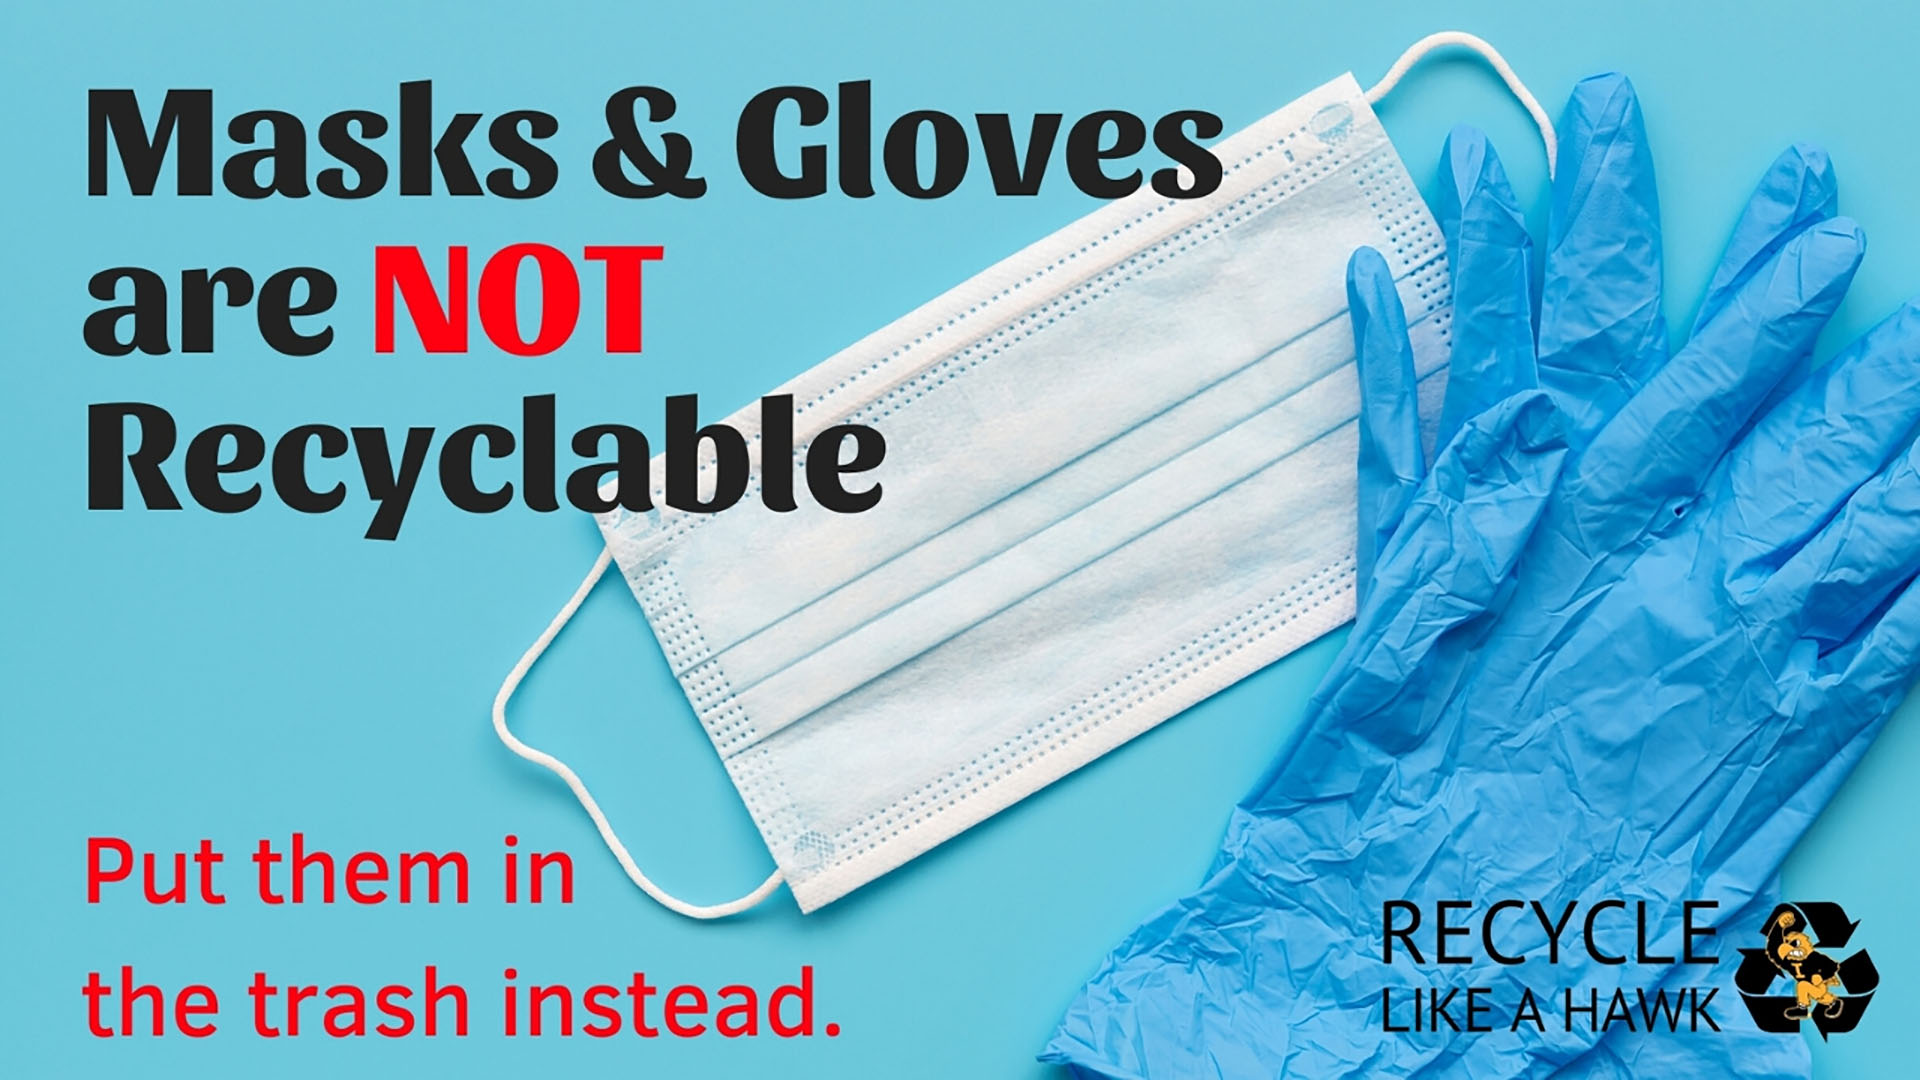 Masks & Gloves are not Recyclable